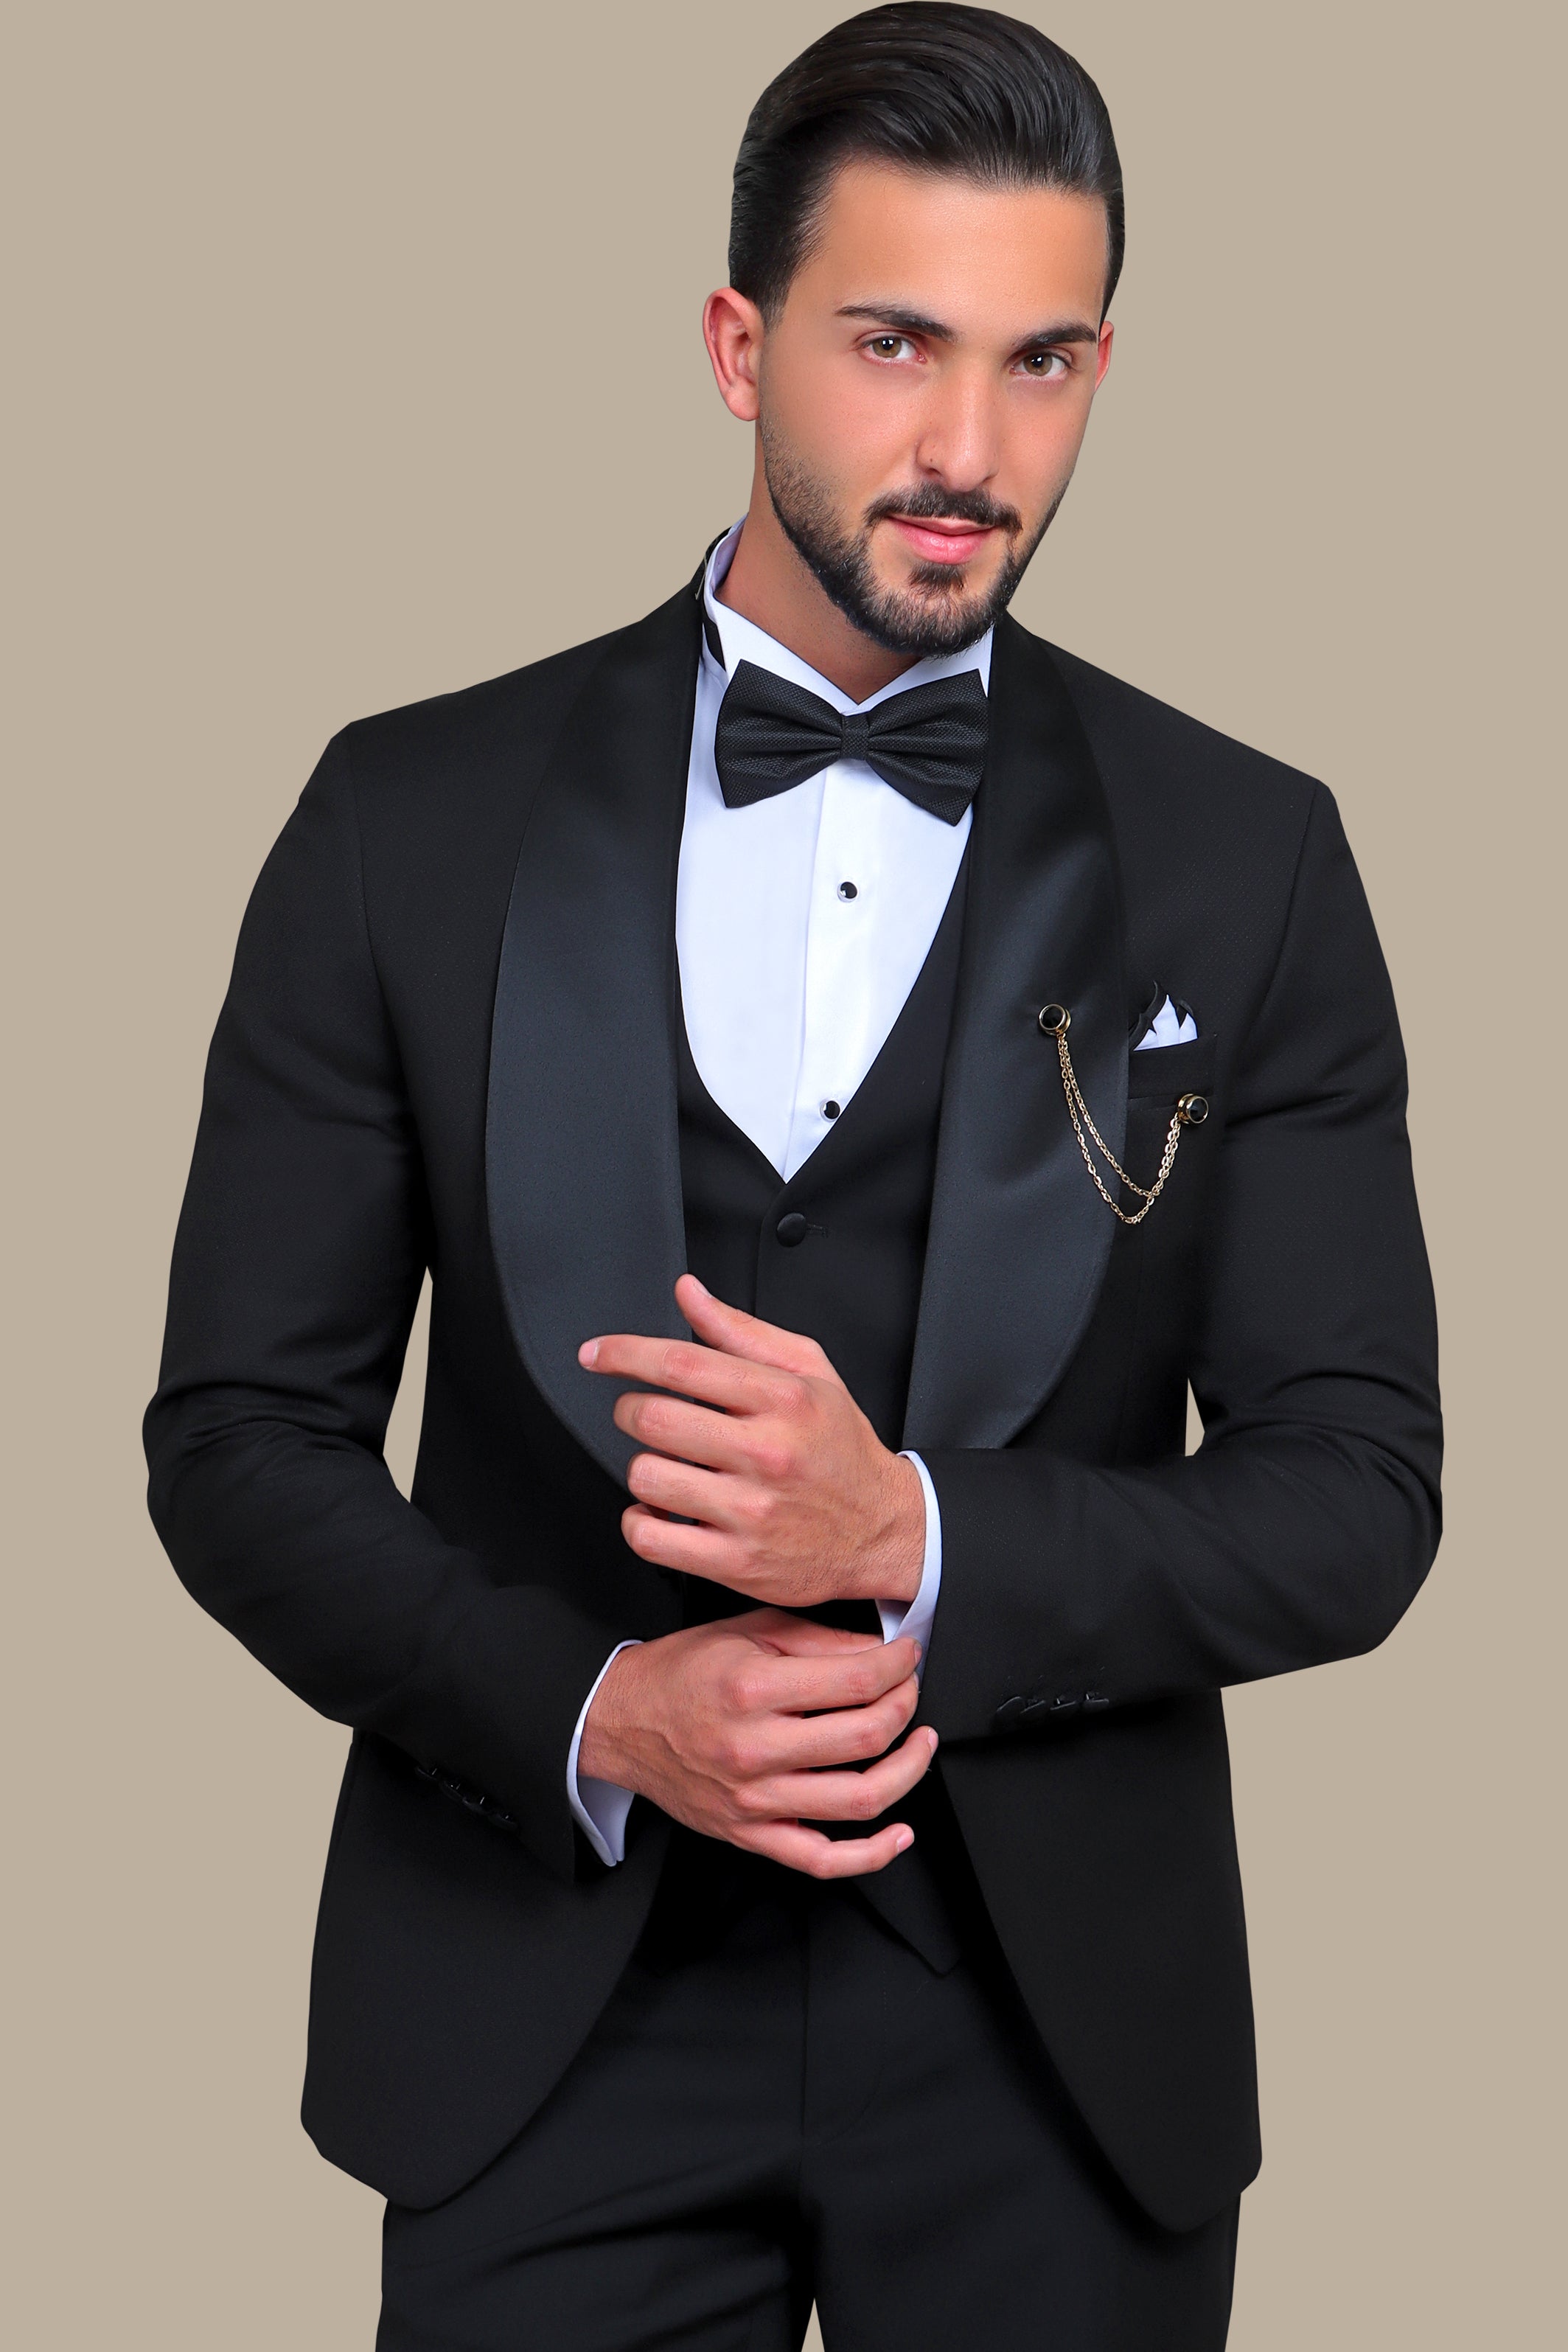 Sophisticated Elegance: Black Wide Shawl Collar Tuxedo for Timeless Style